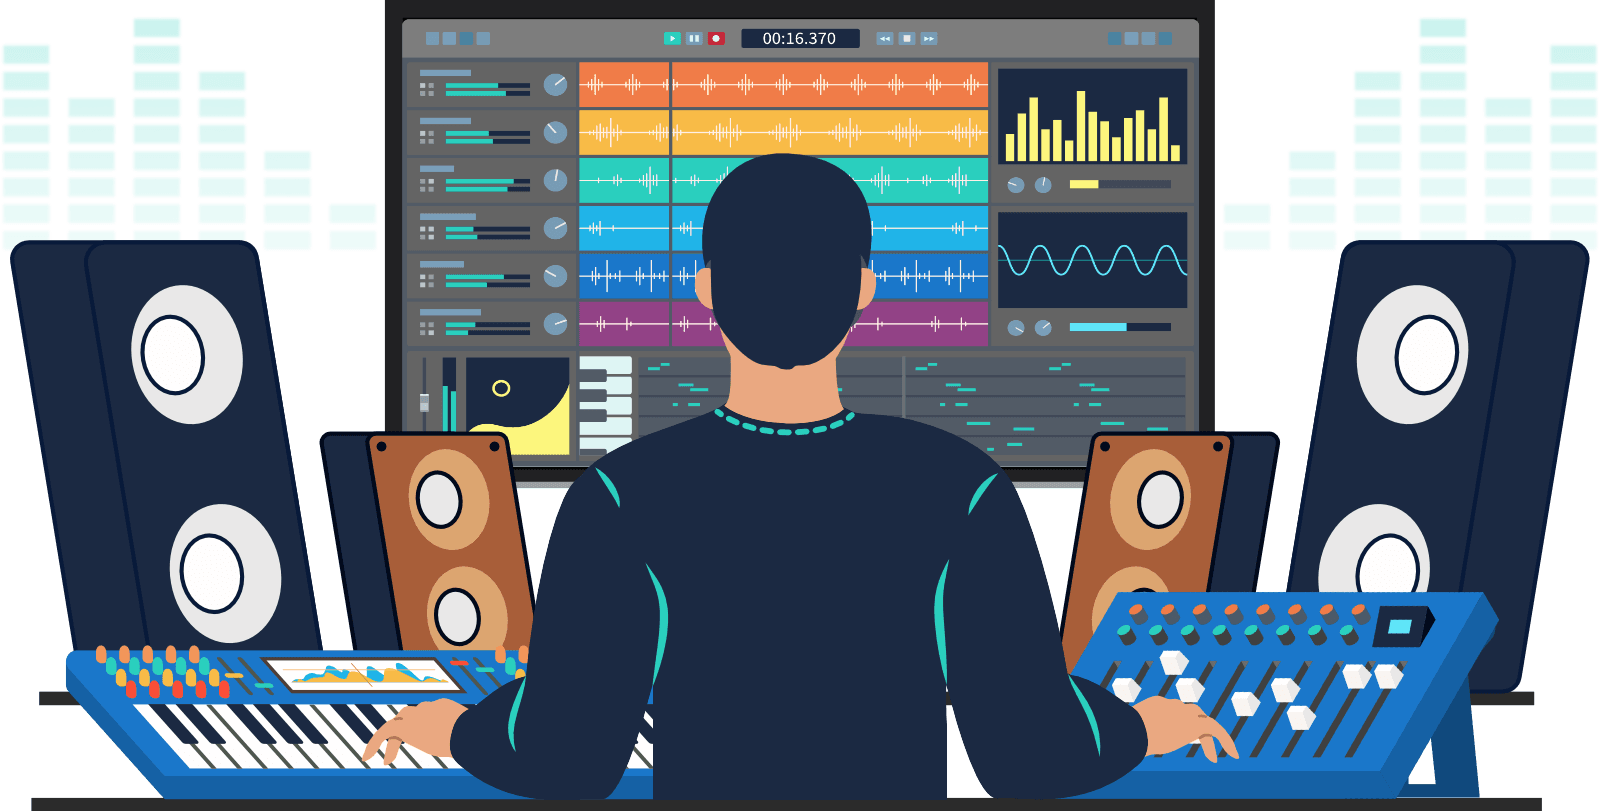 An illustration of someone working on audio projects, using a computer and audio hardware.